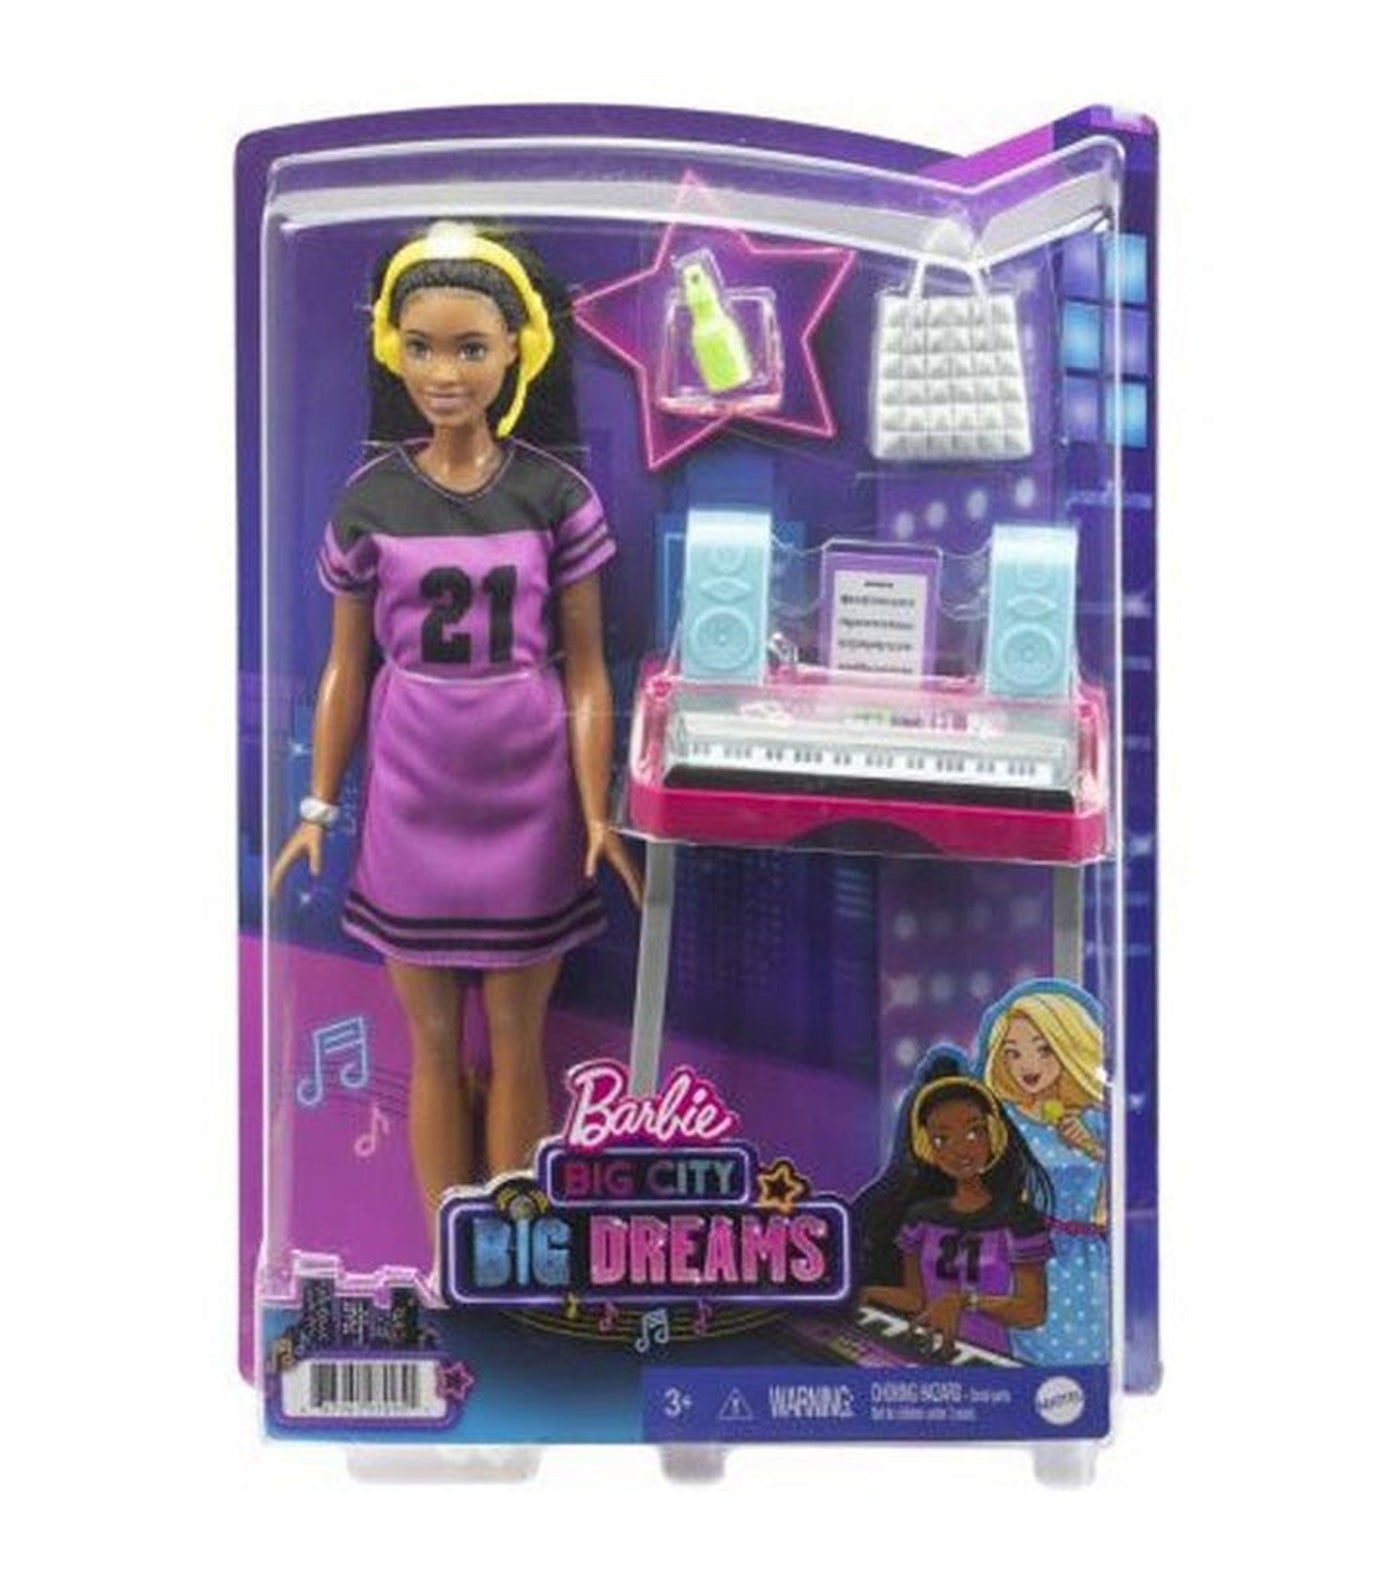 Clear The Stage For Big Dreams - Brooklyn Doll